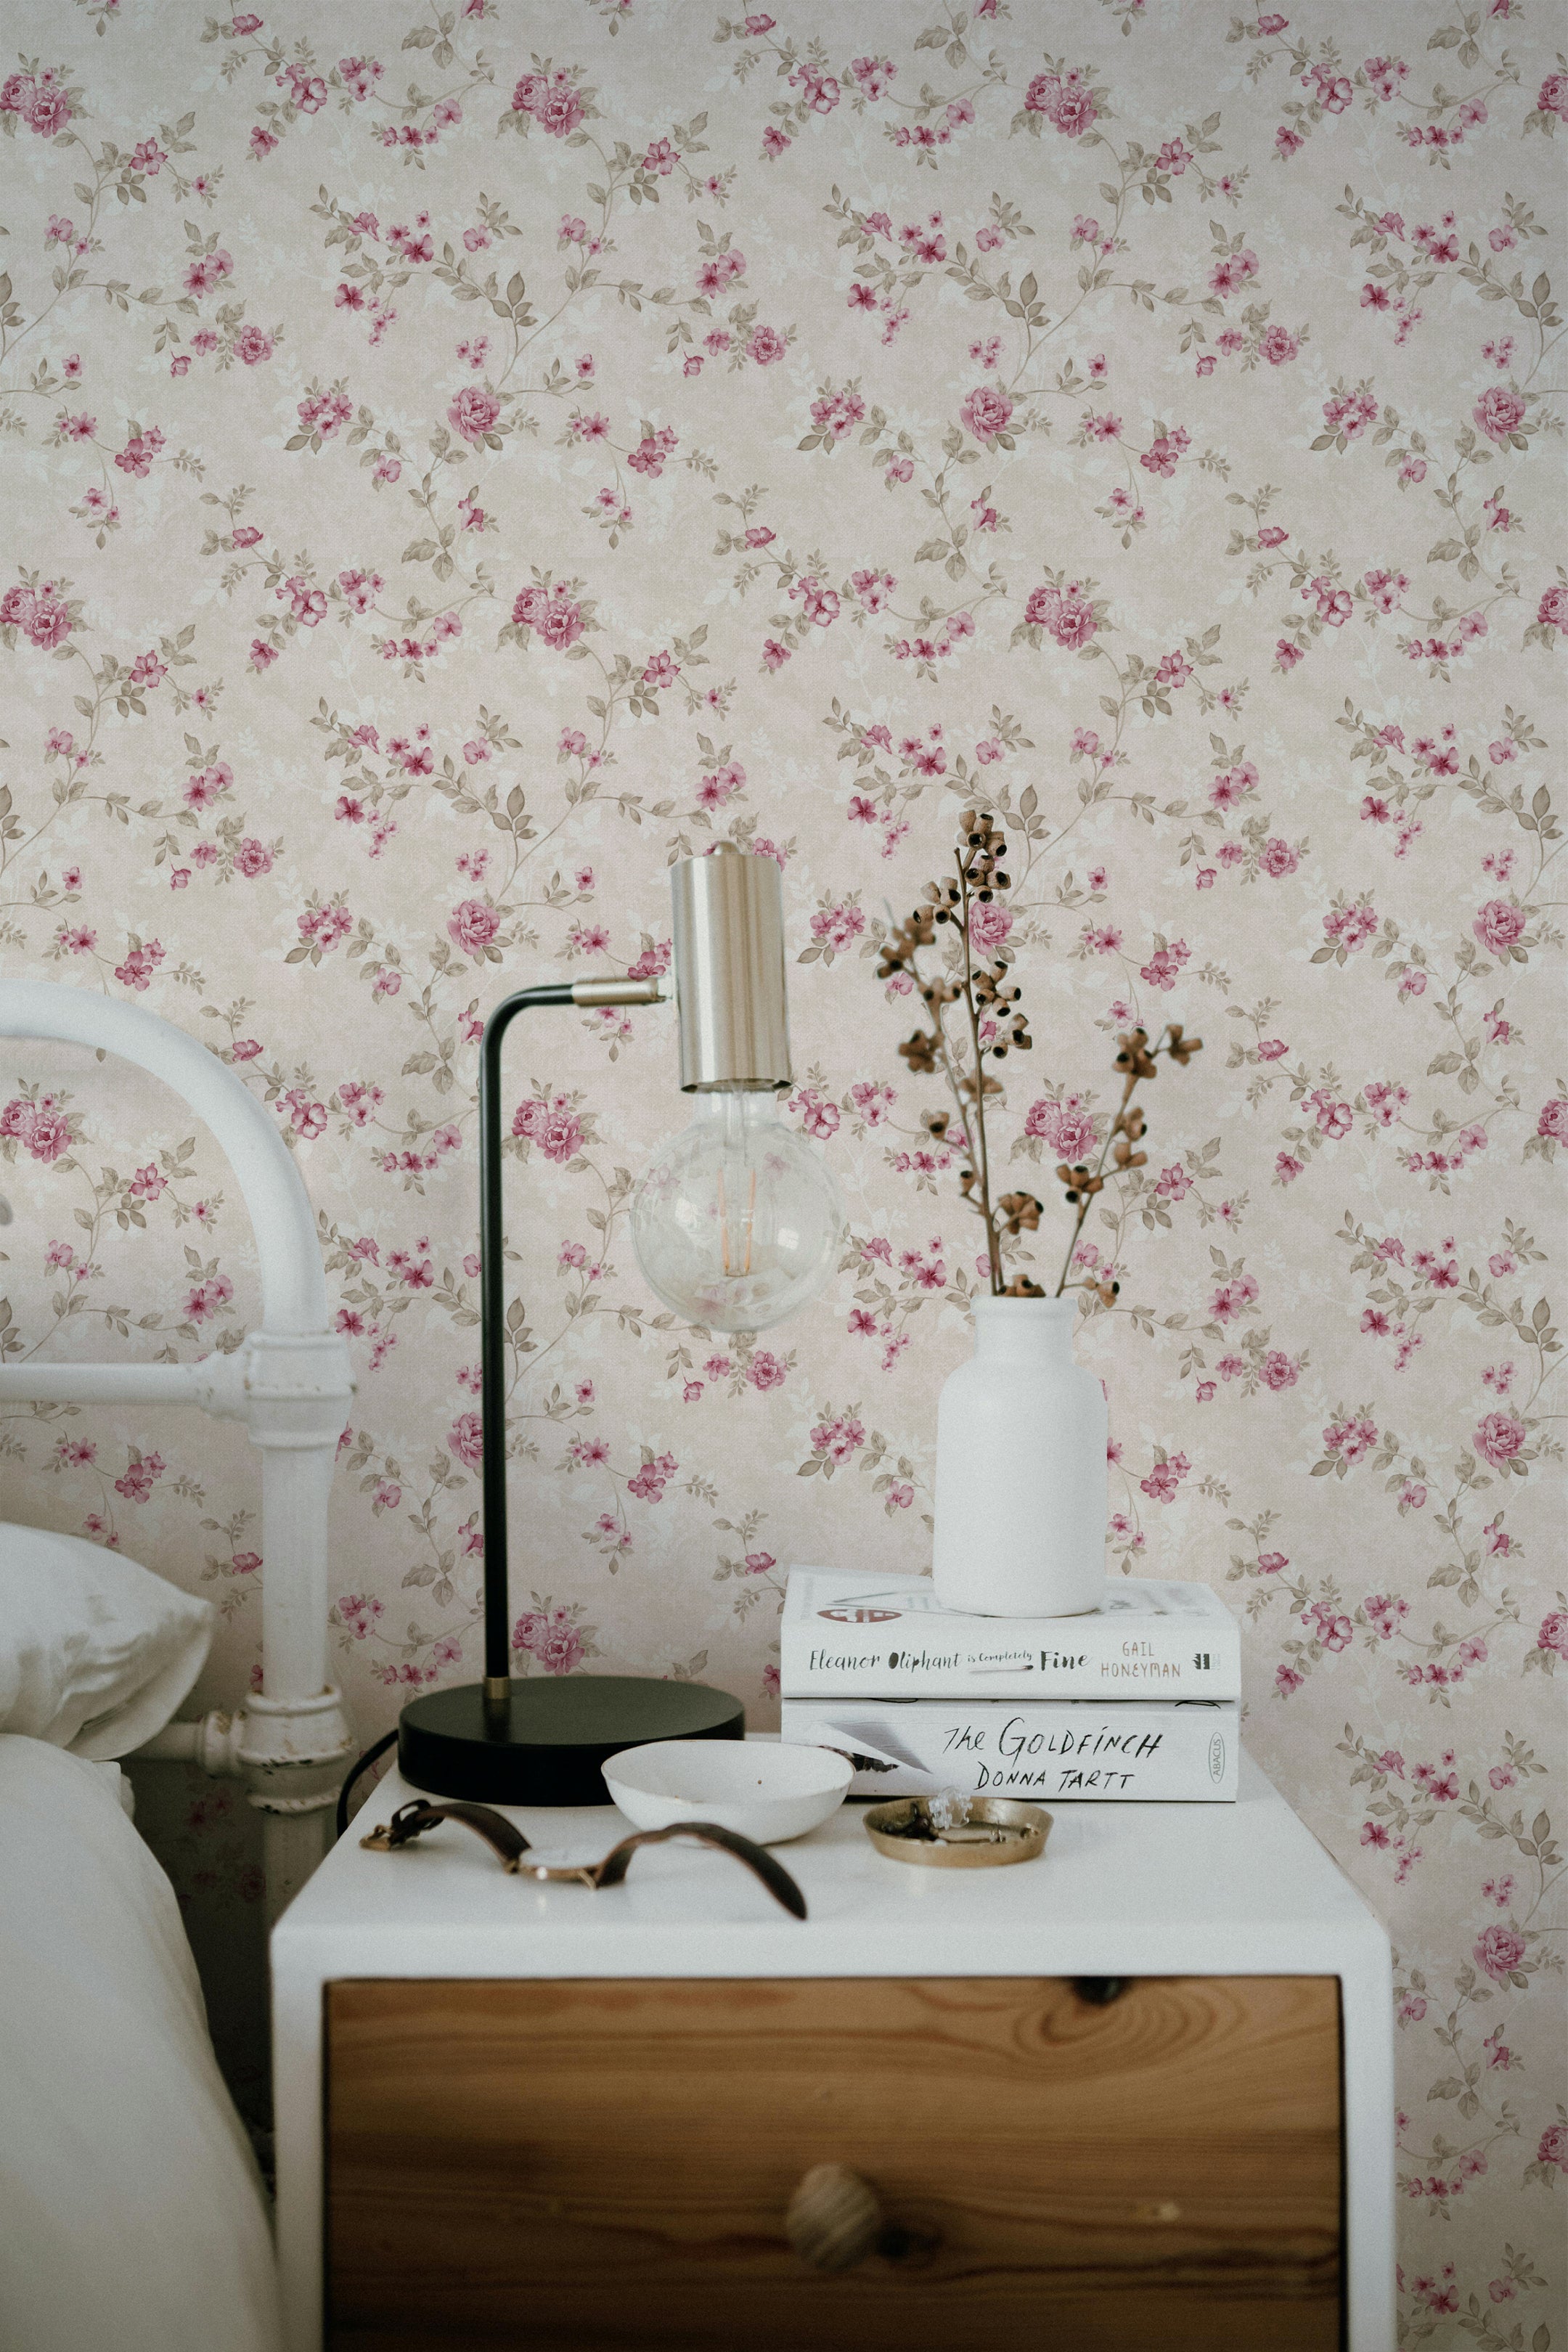 A cozy bedroom setting showcasing the Catrice Floral Wallpaper, which features a delicate pattern of pink roses and soft green foliage on a light beige background. The wallpaper lends a vintage charm to the room, complemented by a modern bedside lamp and a simple white vase with sprigs.